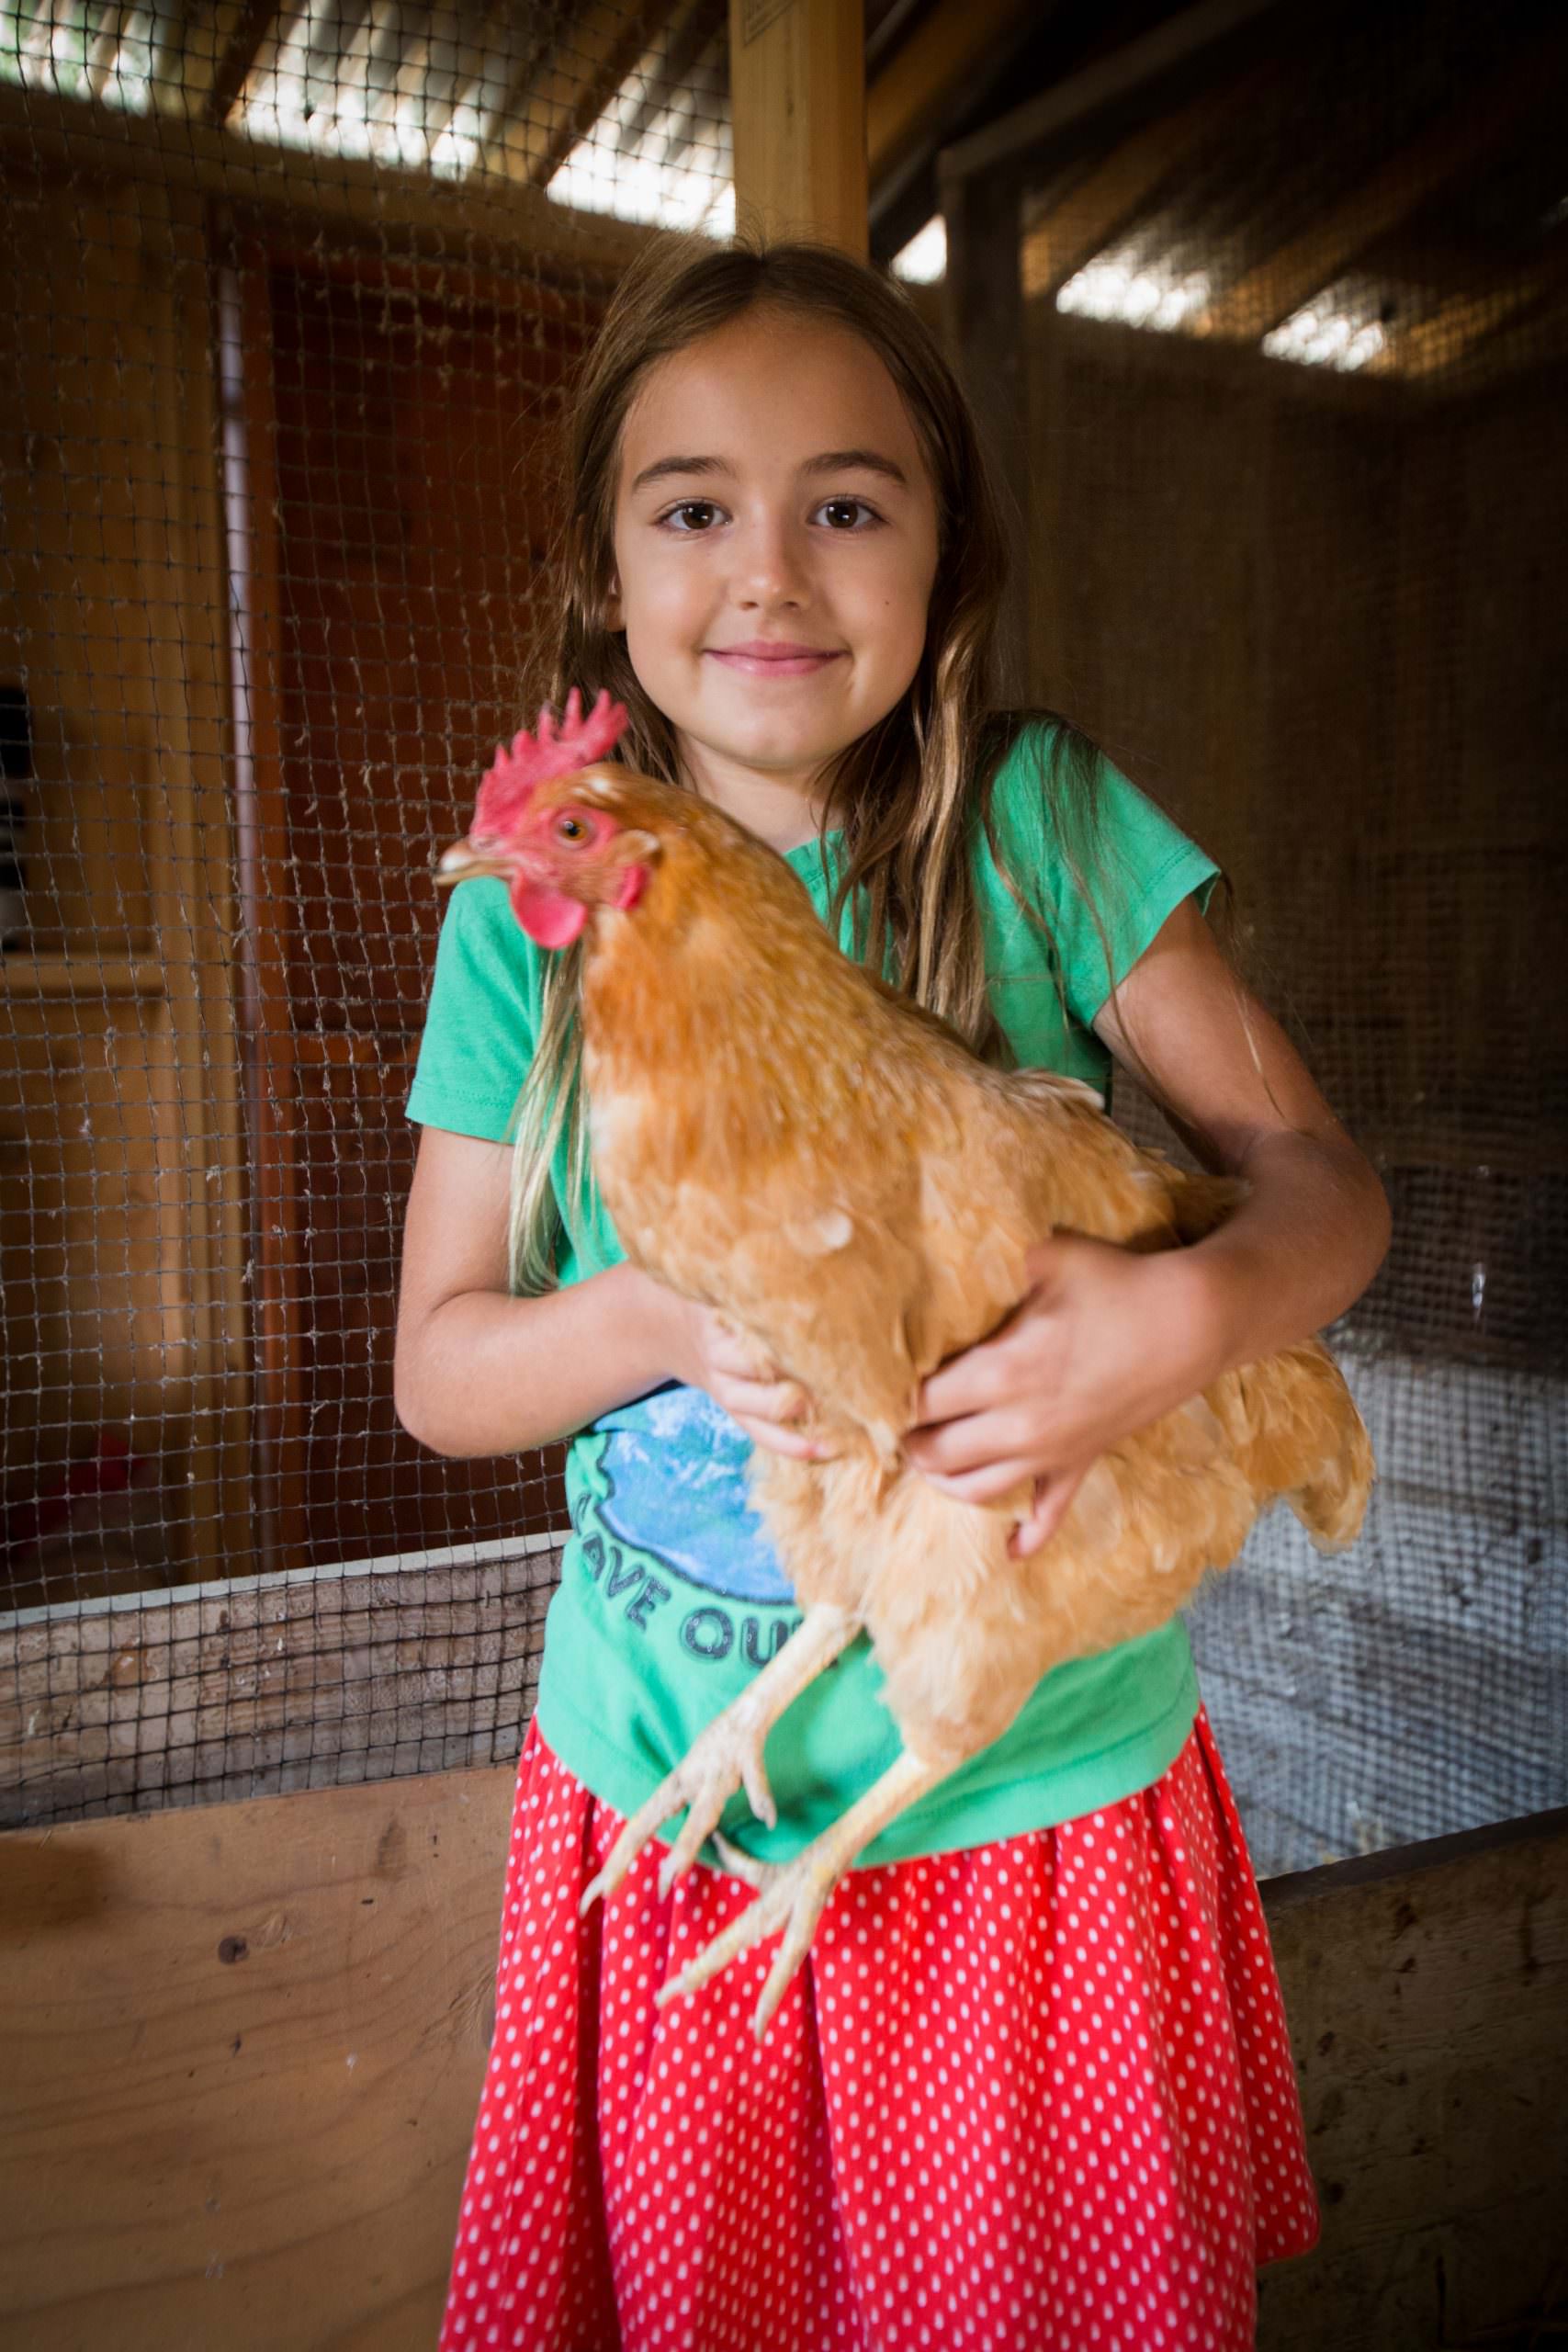 Nicks Cove Farm Girl and chicken at The Croft at Nicks Cove credit Mike Norquist